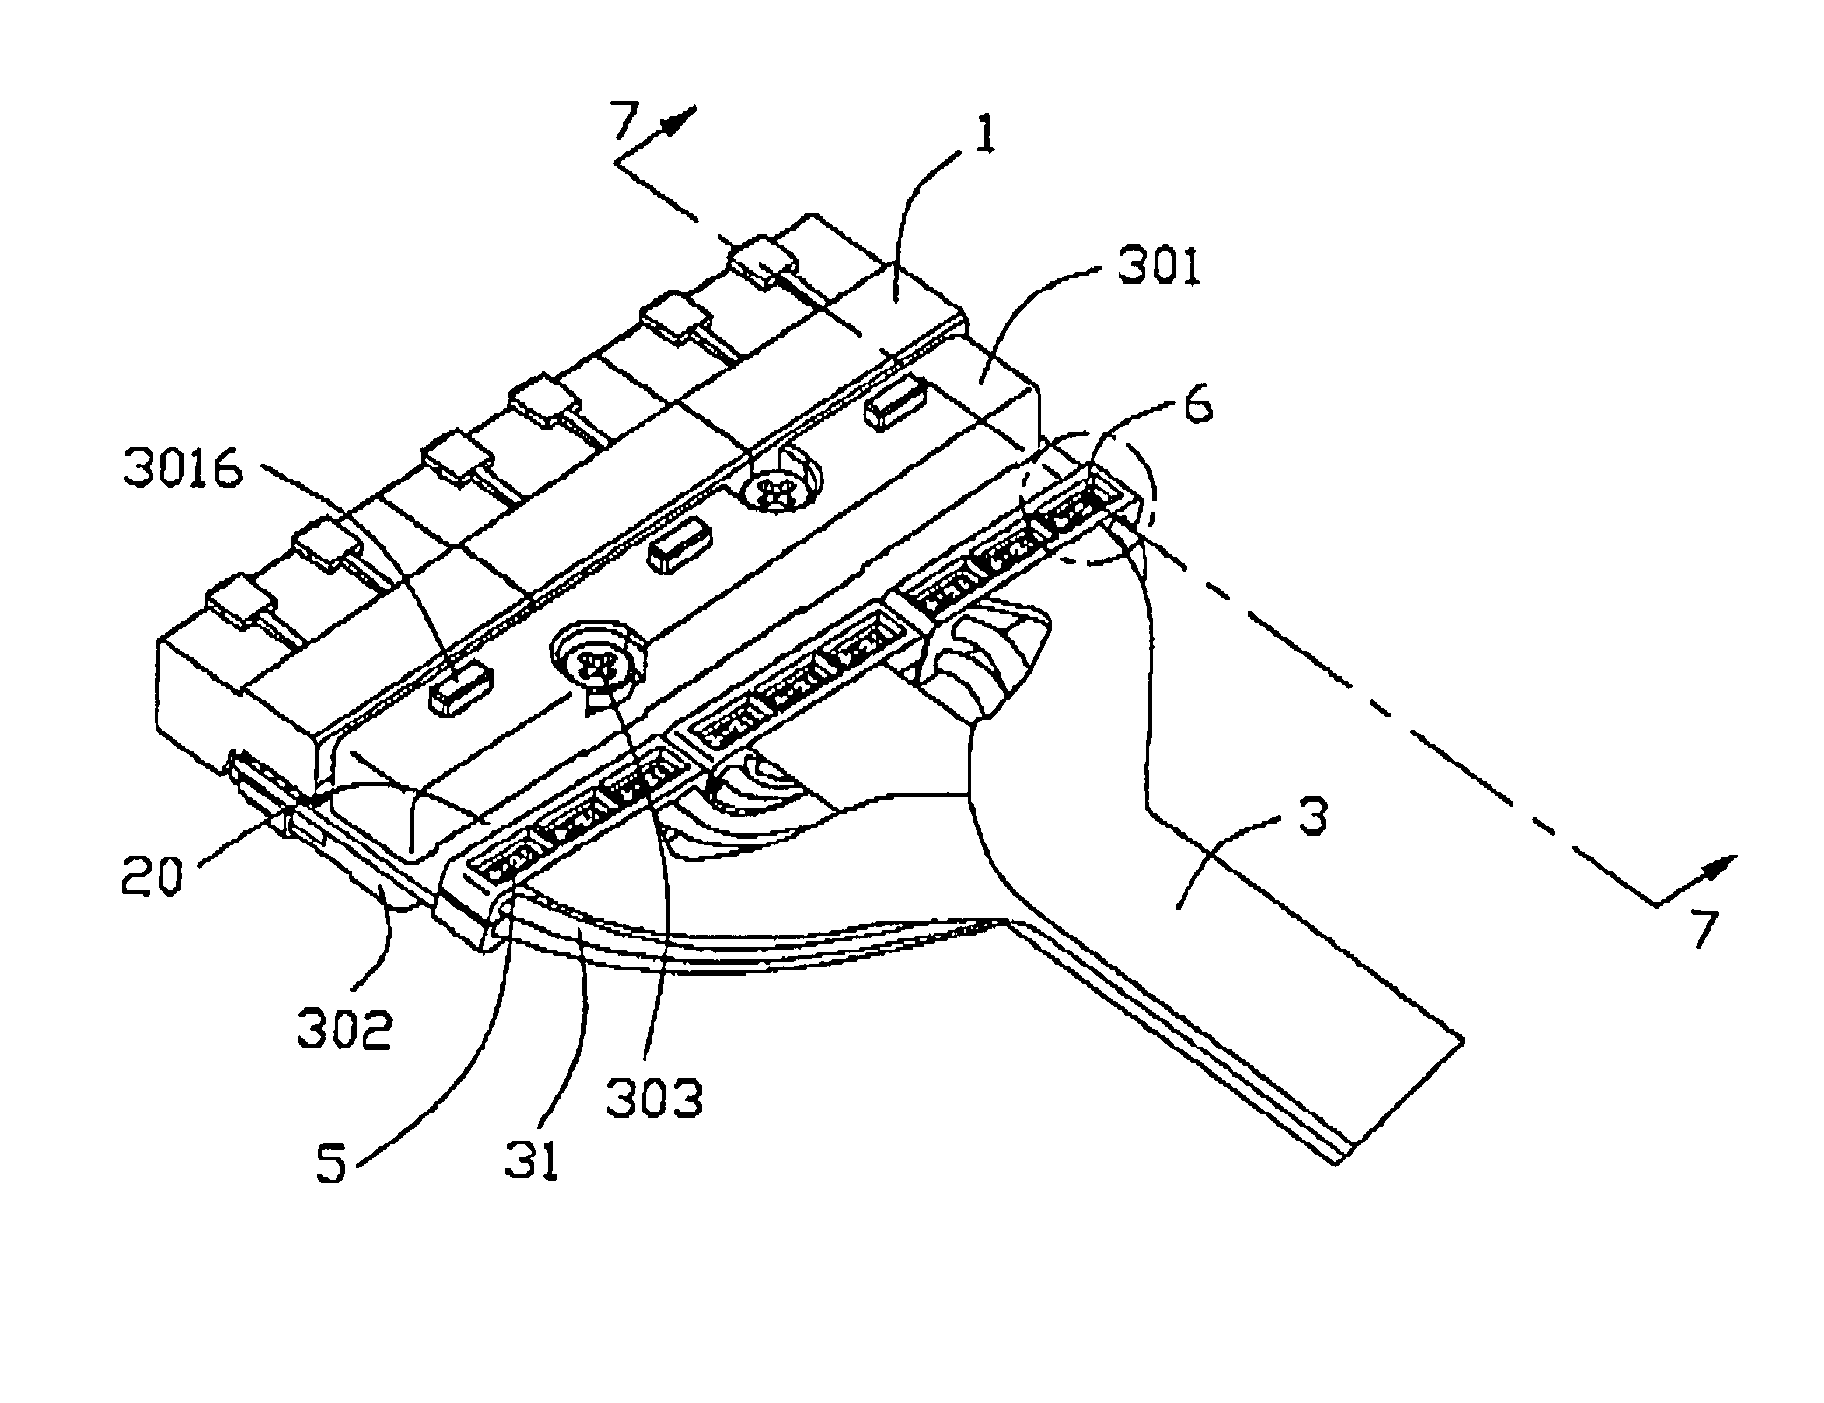 Cable connector assembly with wire spacer